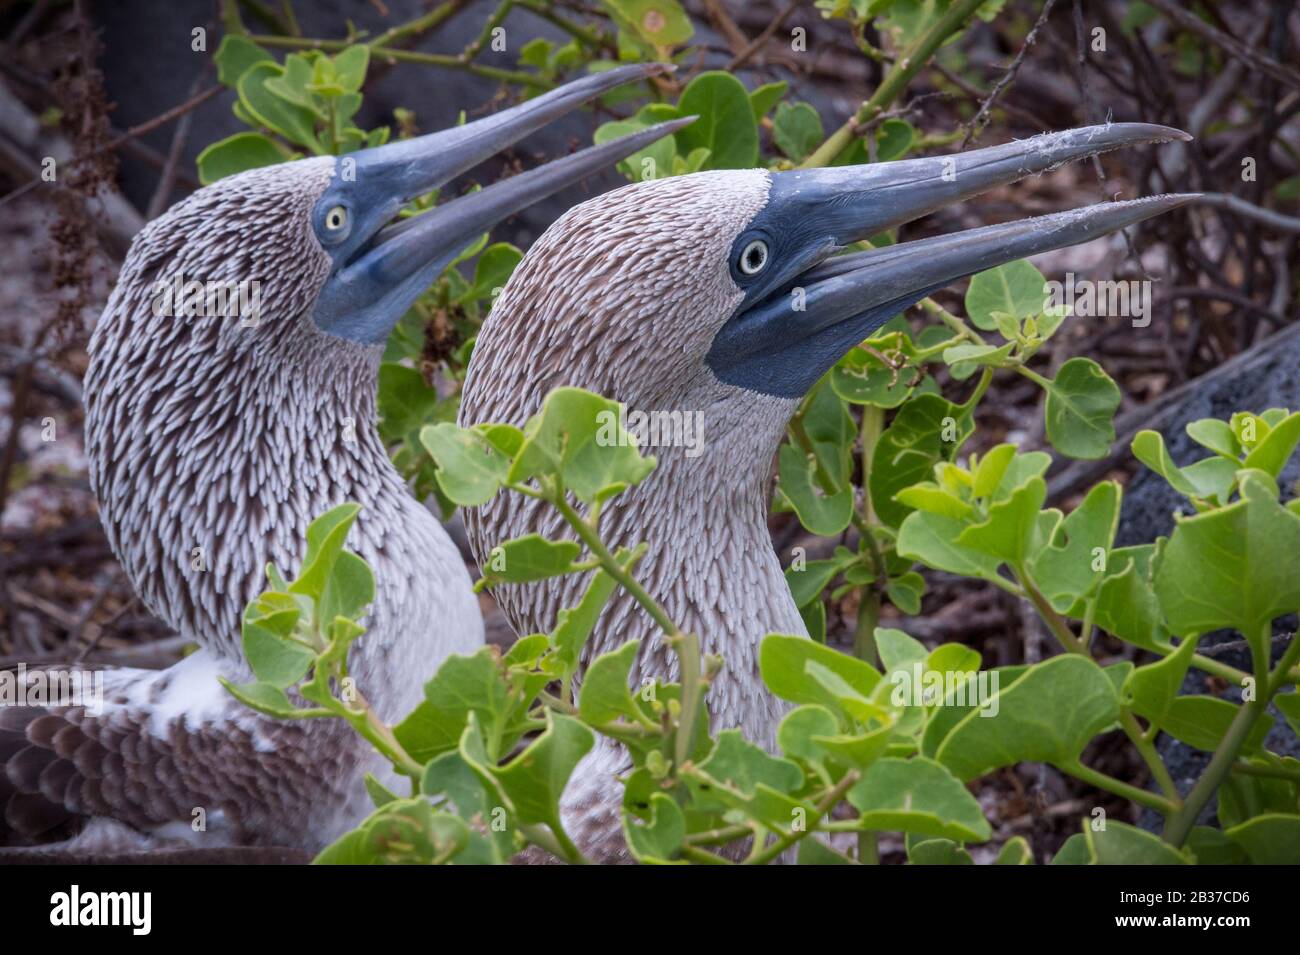 Ecuador, Galapagos archipelago, classified as World Heritage by UNESCO, Lobos Island, blue-footed boobies (Sula nebouxii) in love parade Stock Photo